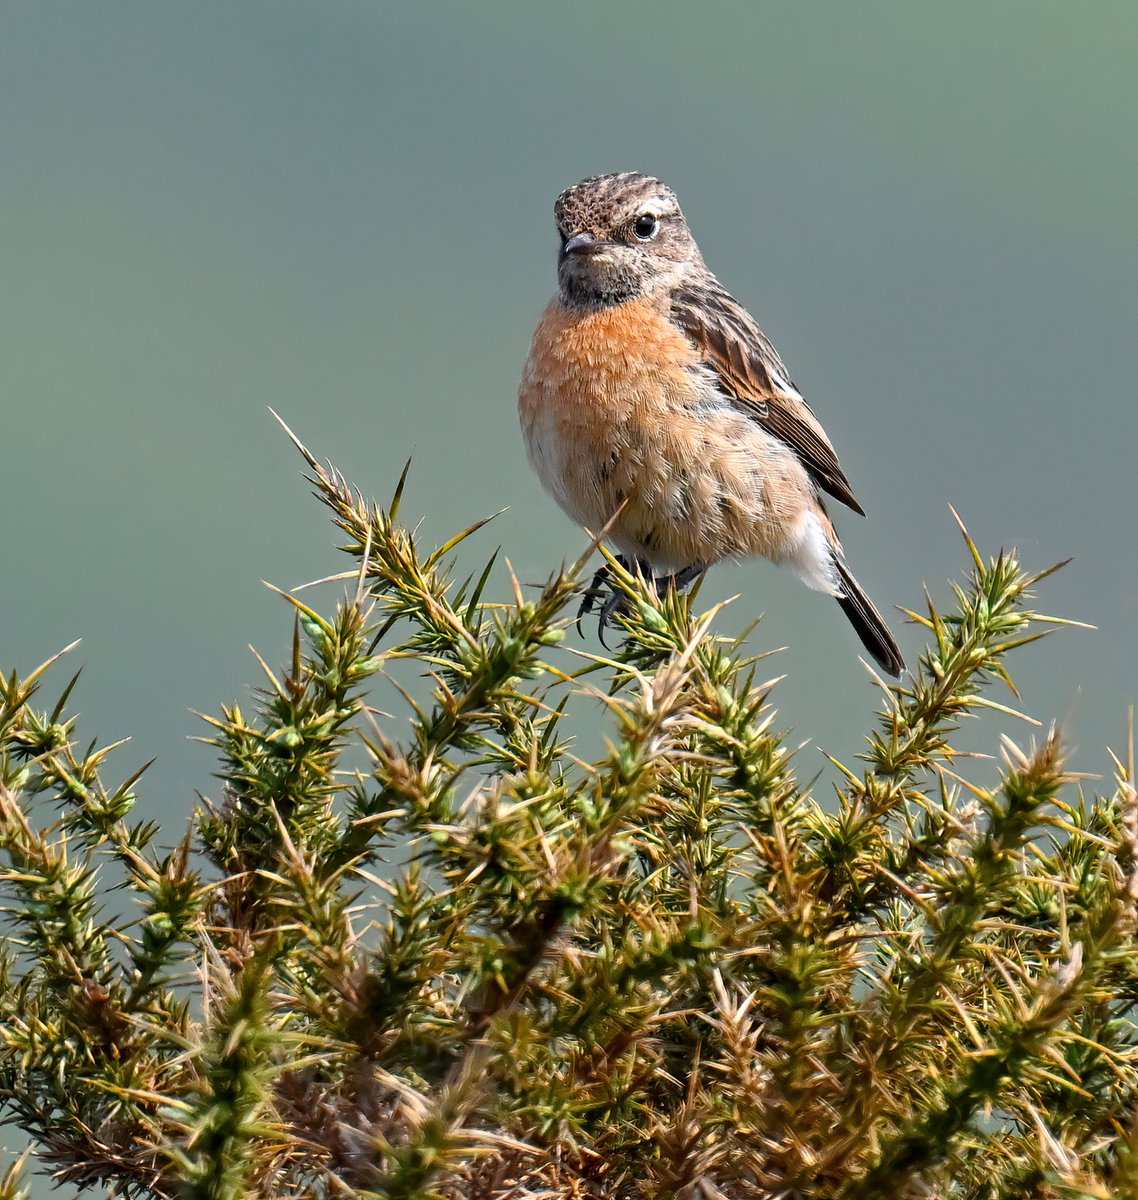 Female Stonechat in gorse. 😊
 Looks a bit prickly doesn't it! 😮😁
 Taken last weekend on the Quantock Hills. 🐦